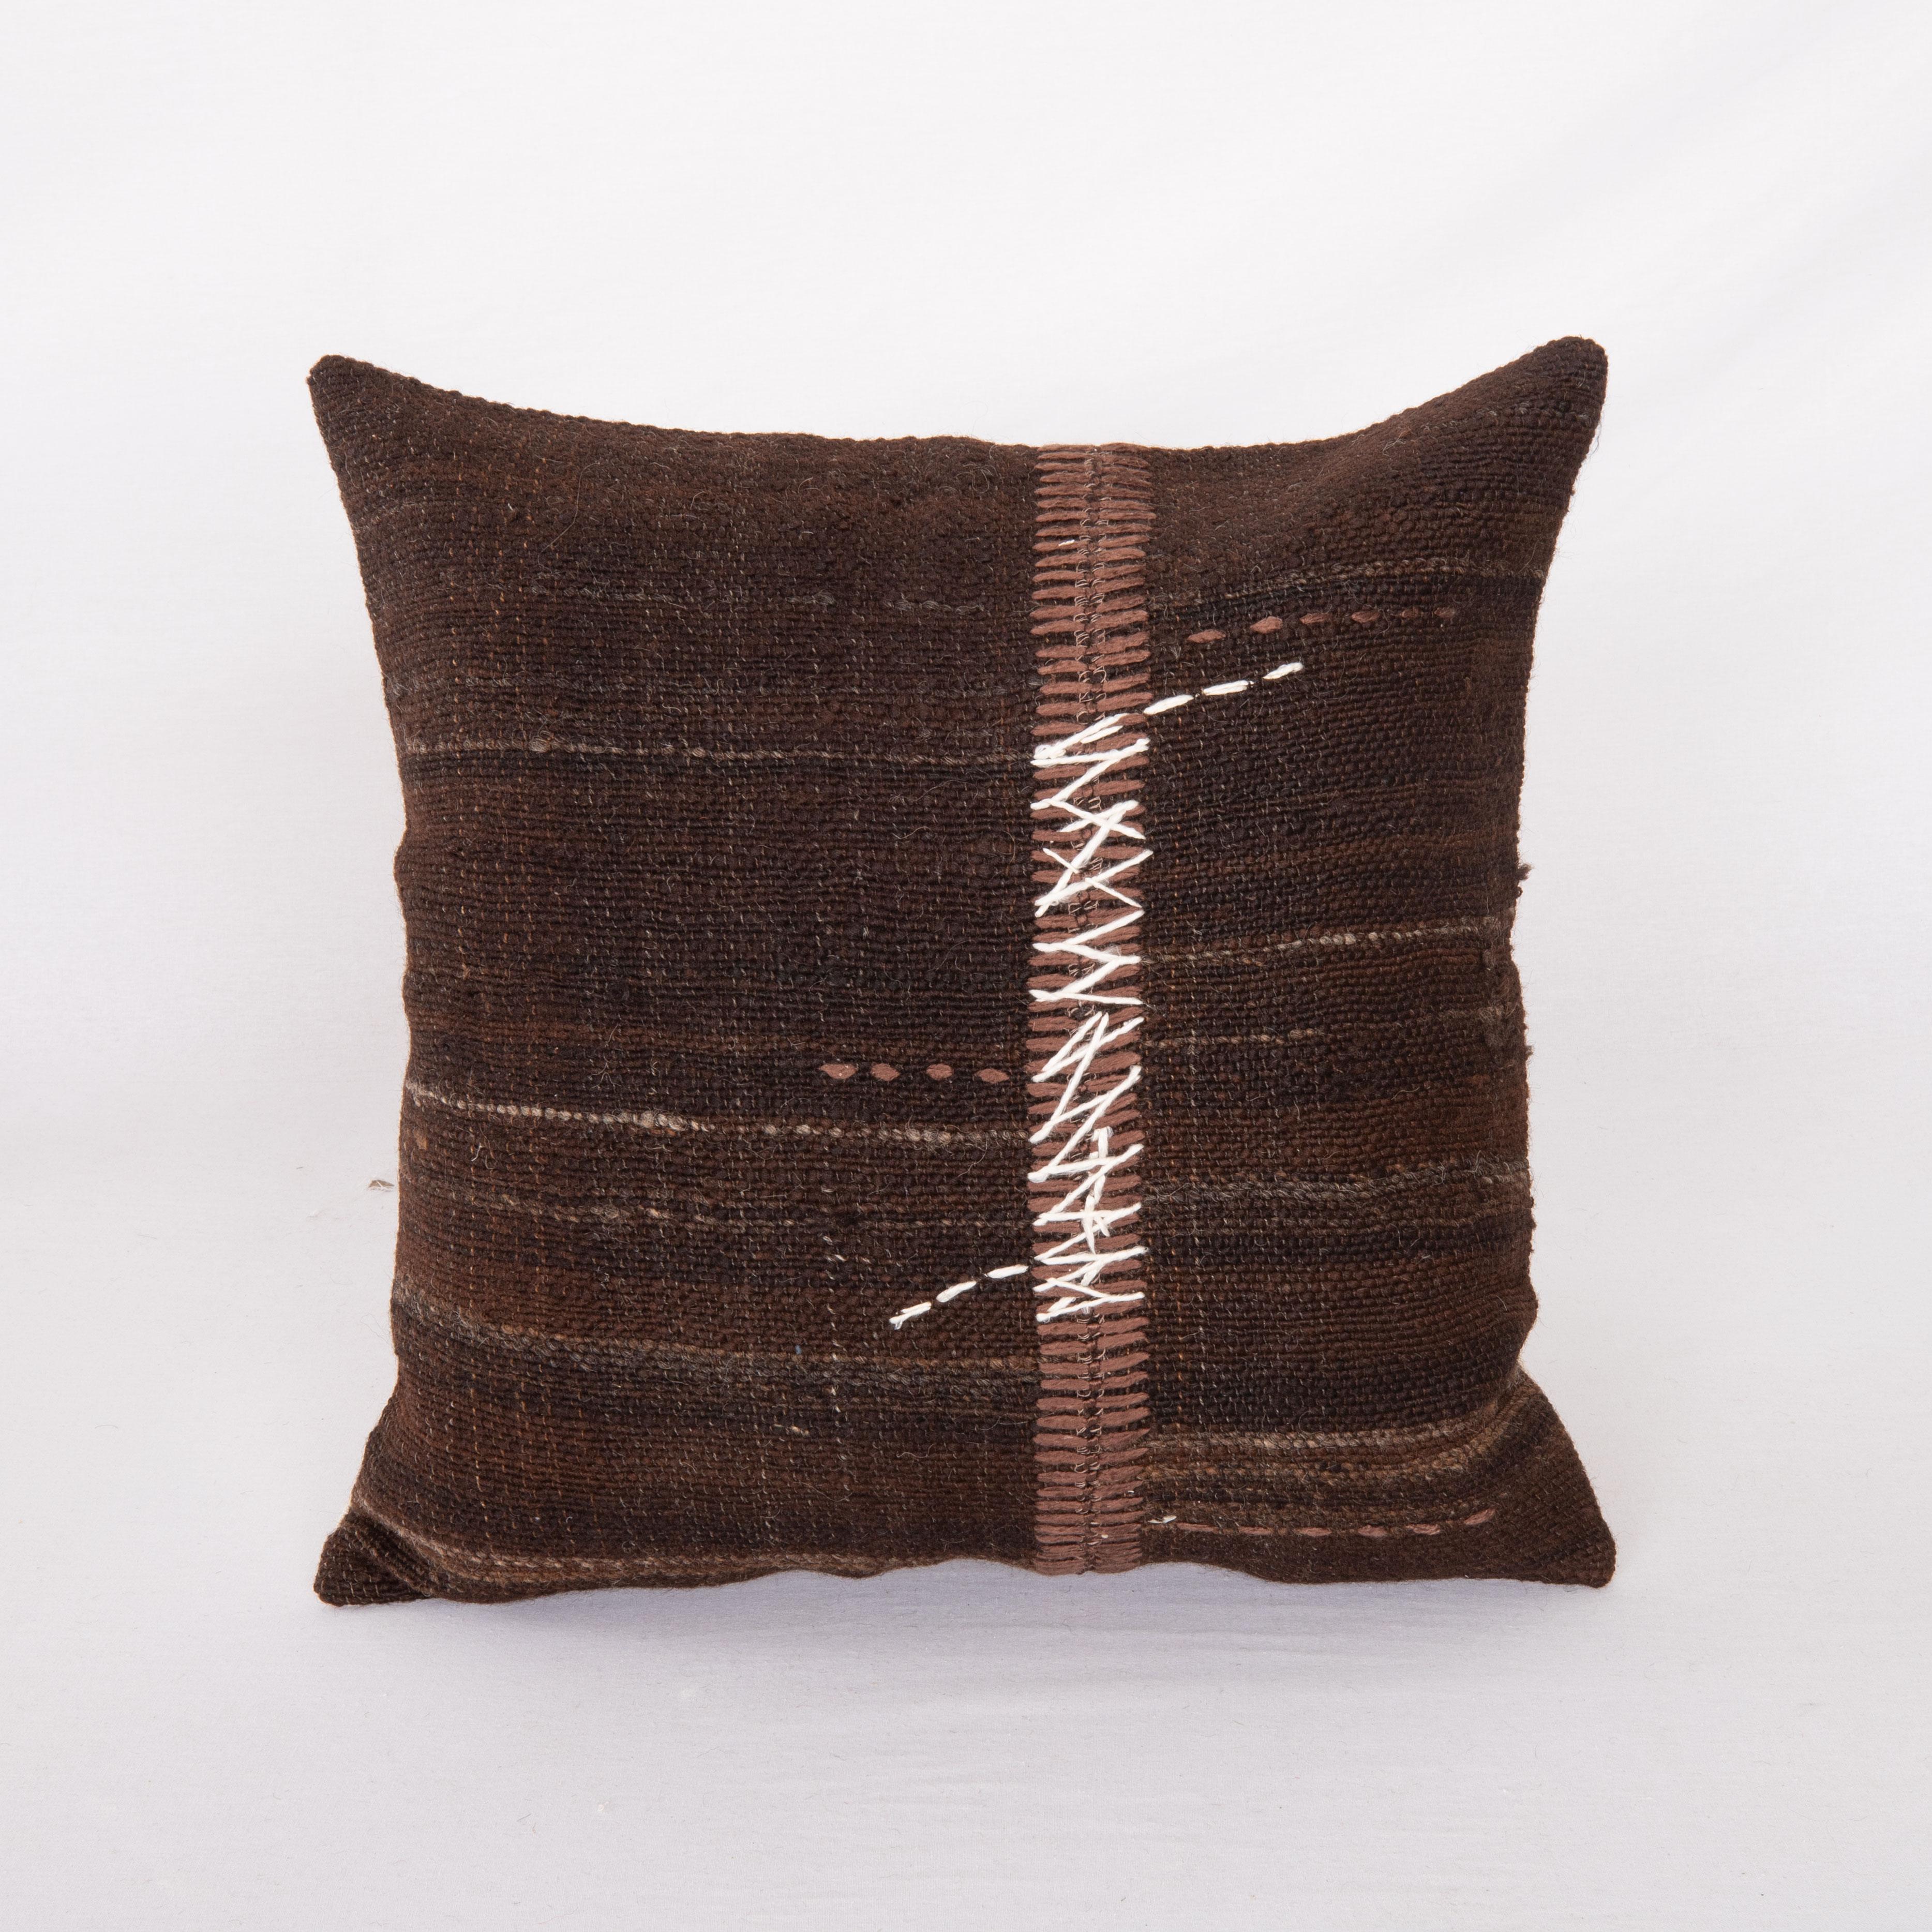 Rustic pillow case made from a vintage Un-Dyed wool coverlet, Mid 20th C


This pillow is made from a vintage coverlet that is hand woven using un-dyed wool. Our addition to the piece is silk hand stitching. It does not come with an insert. Linen in